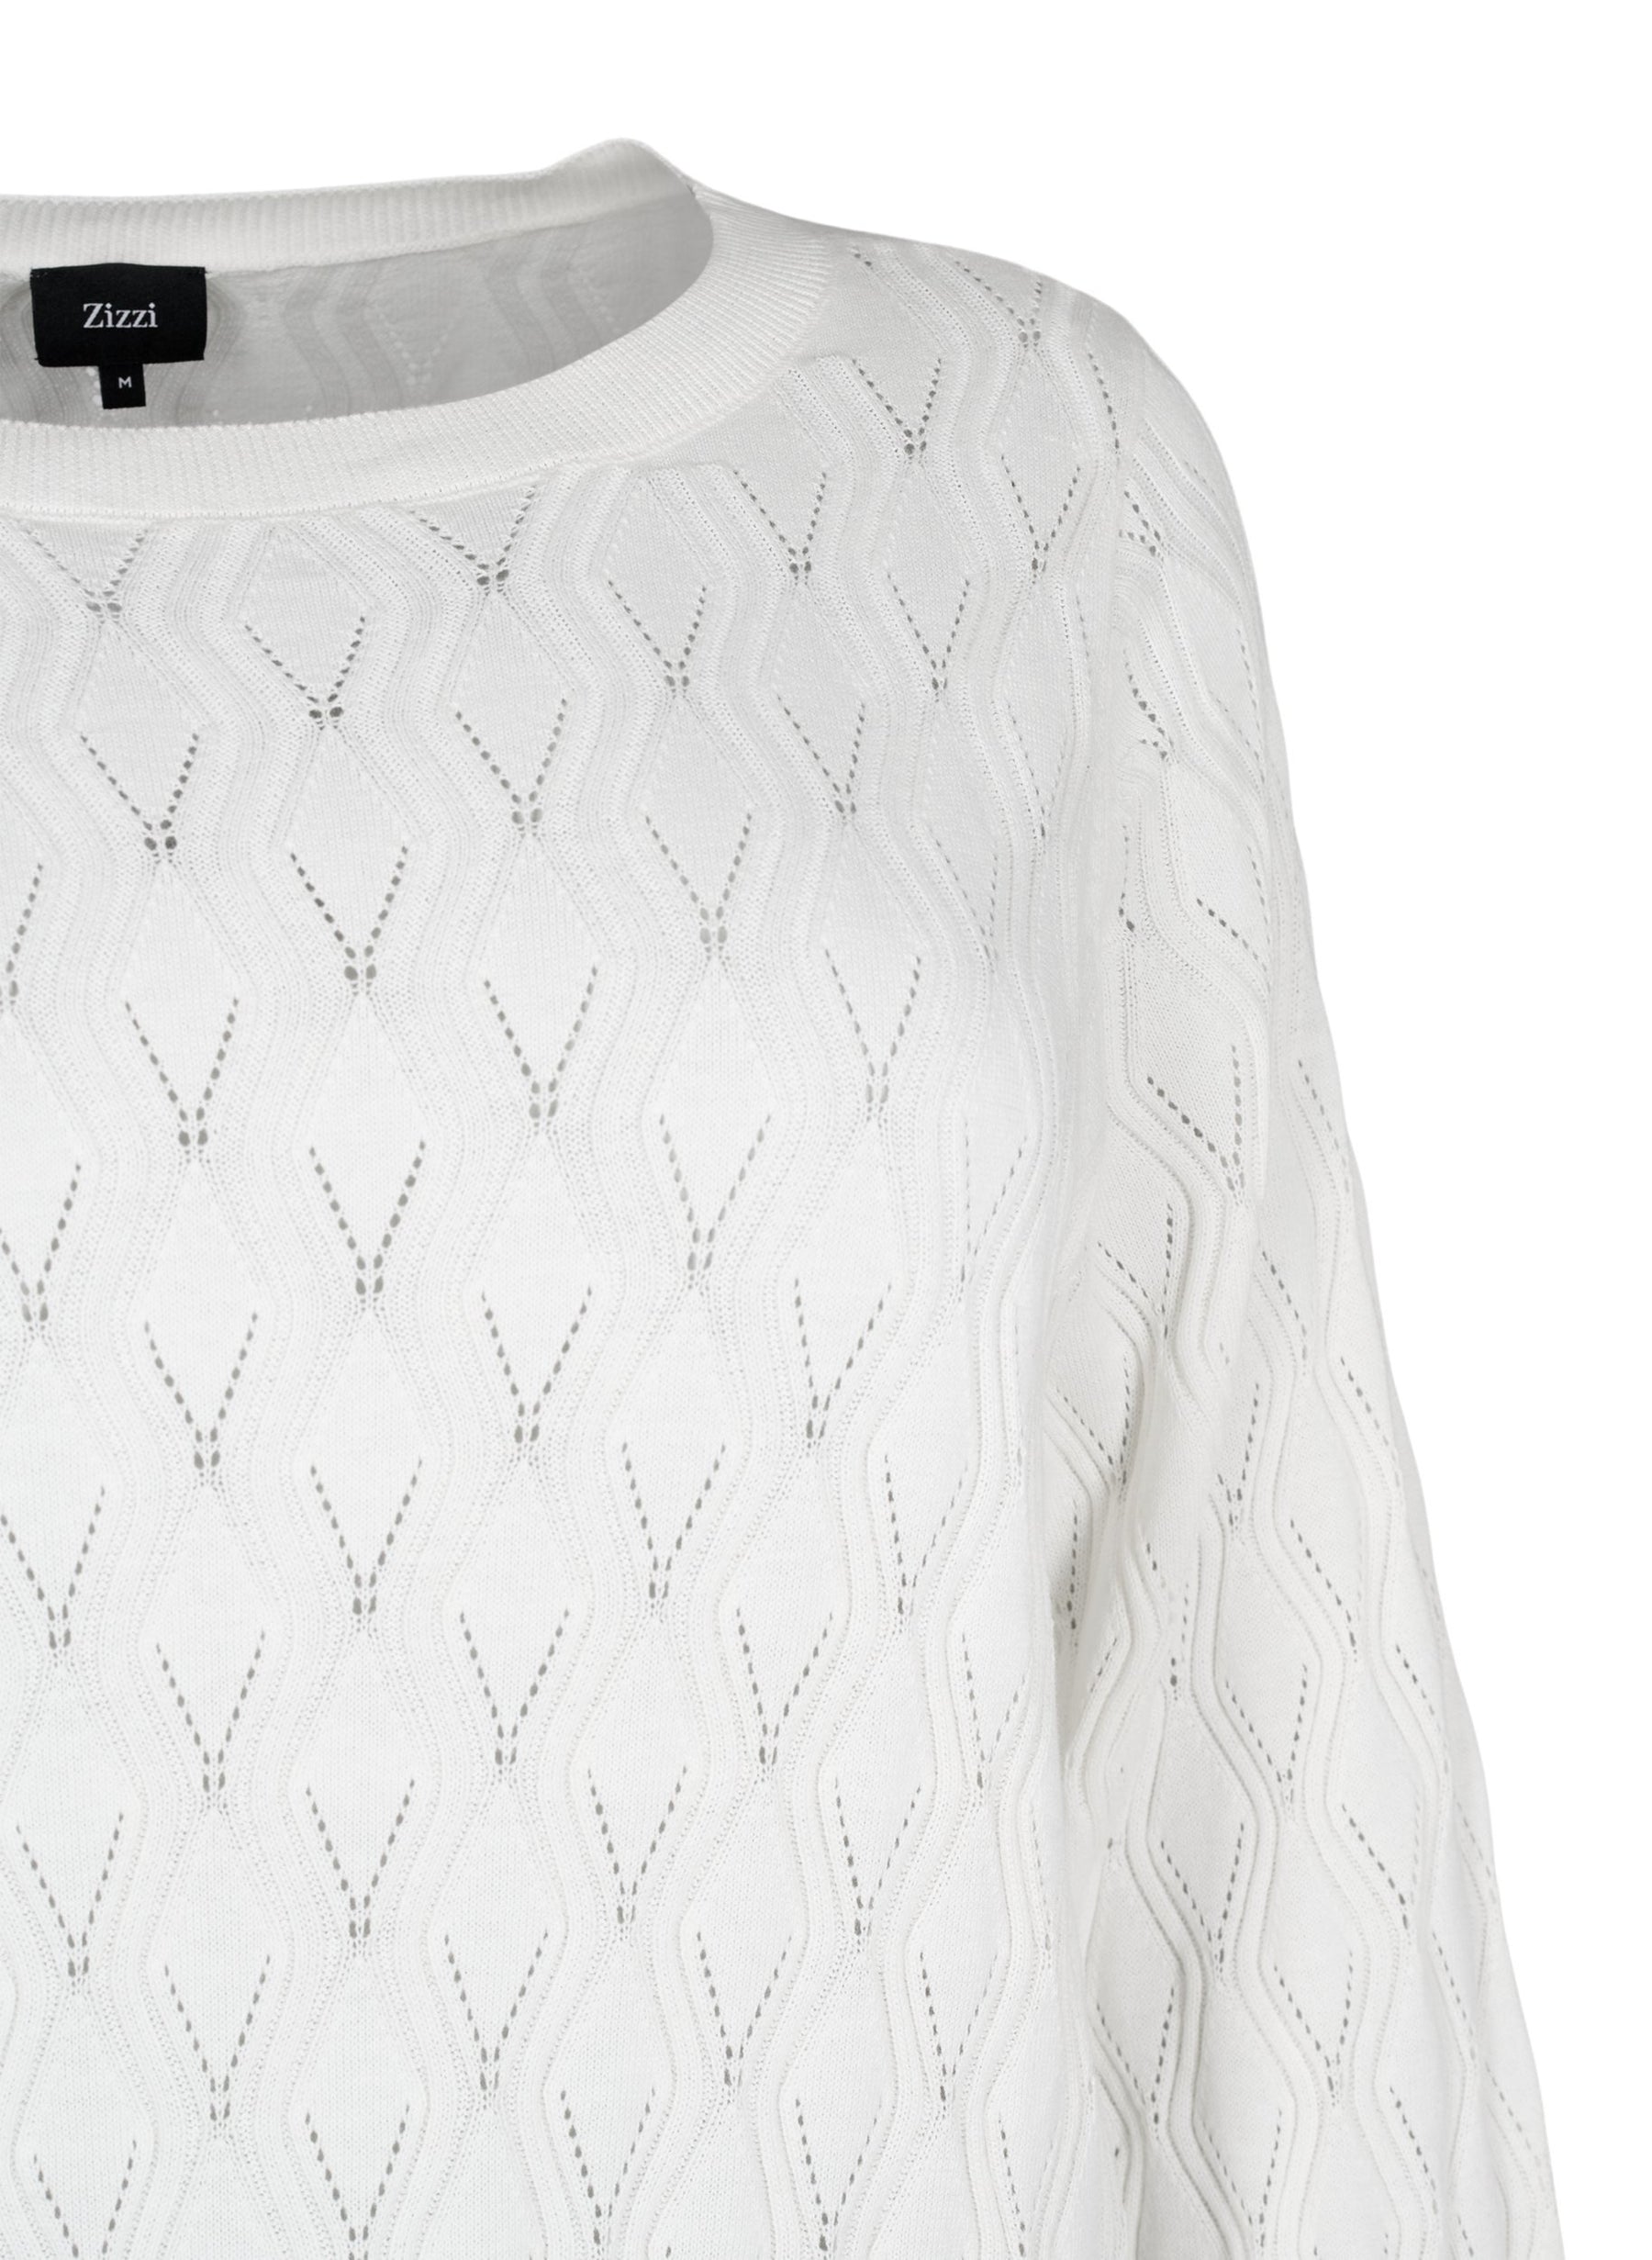 Zizzi Knitted Pullover in White | Plus Size Clothing